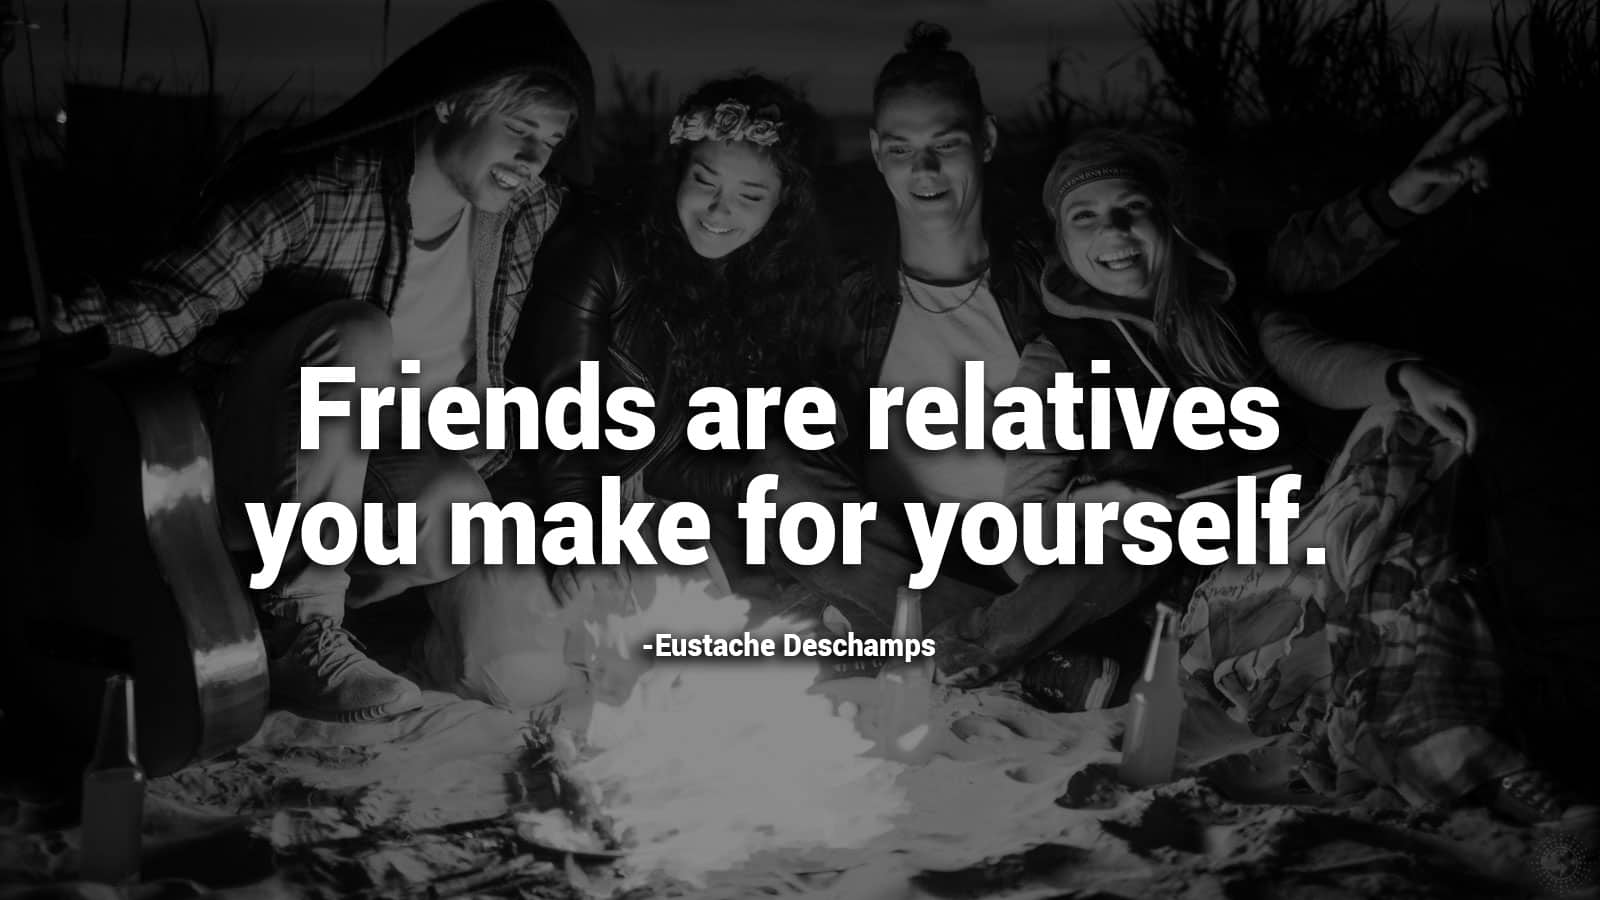 15 Quotes for Besties to Share With Each Other